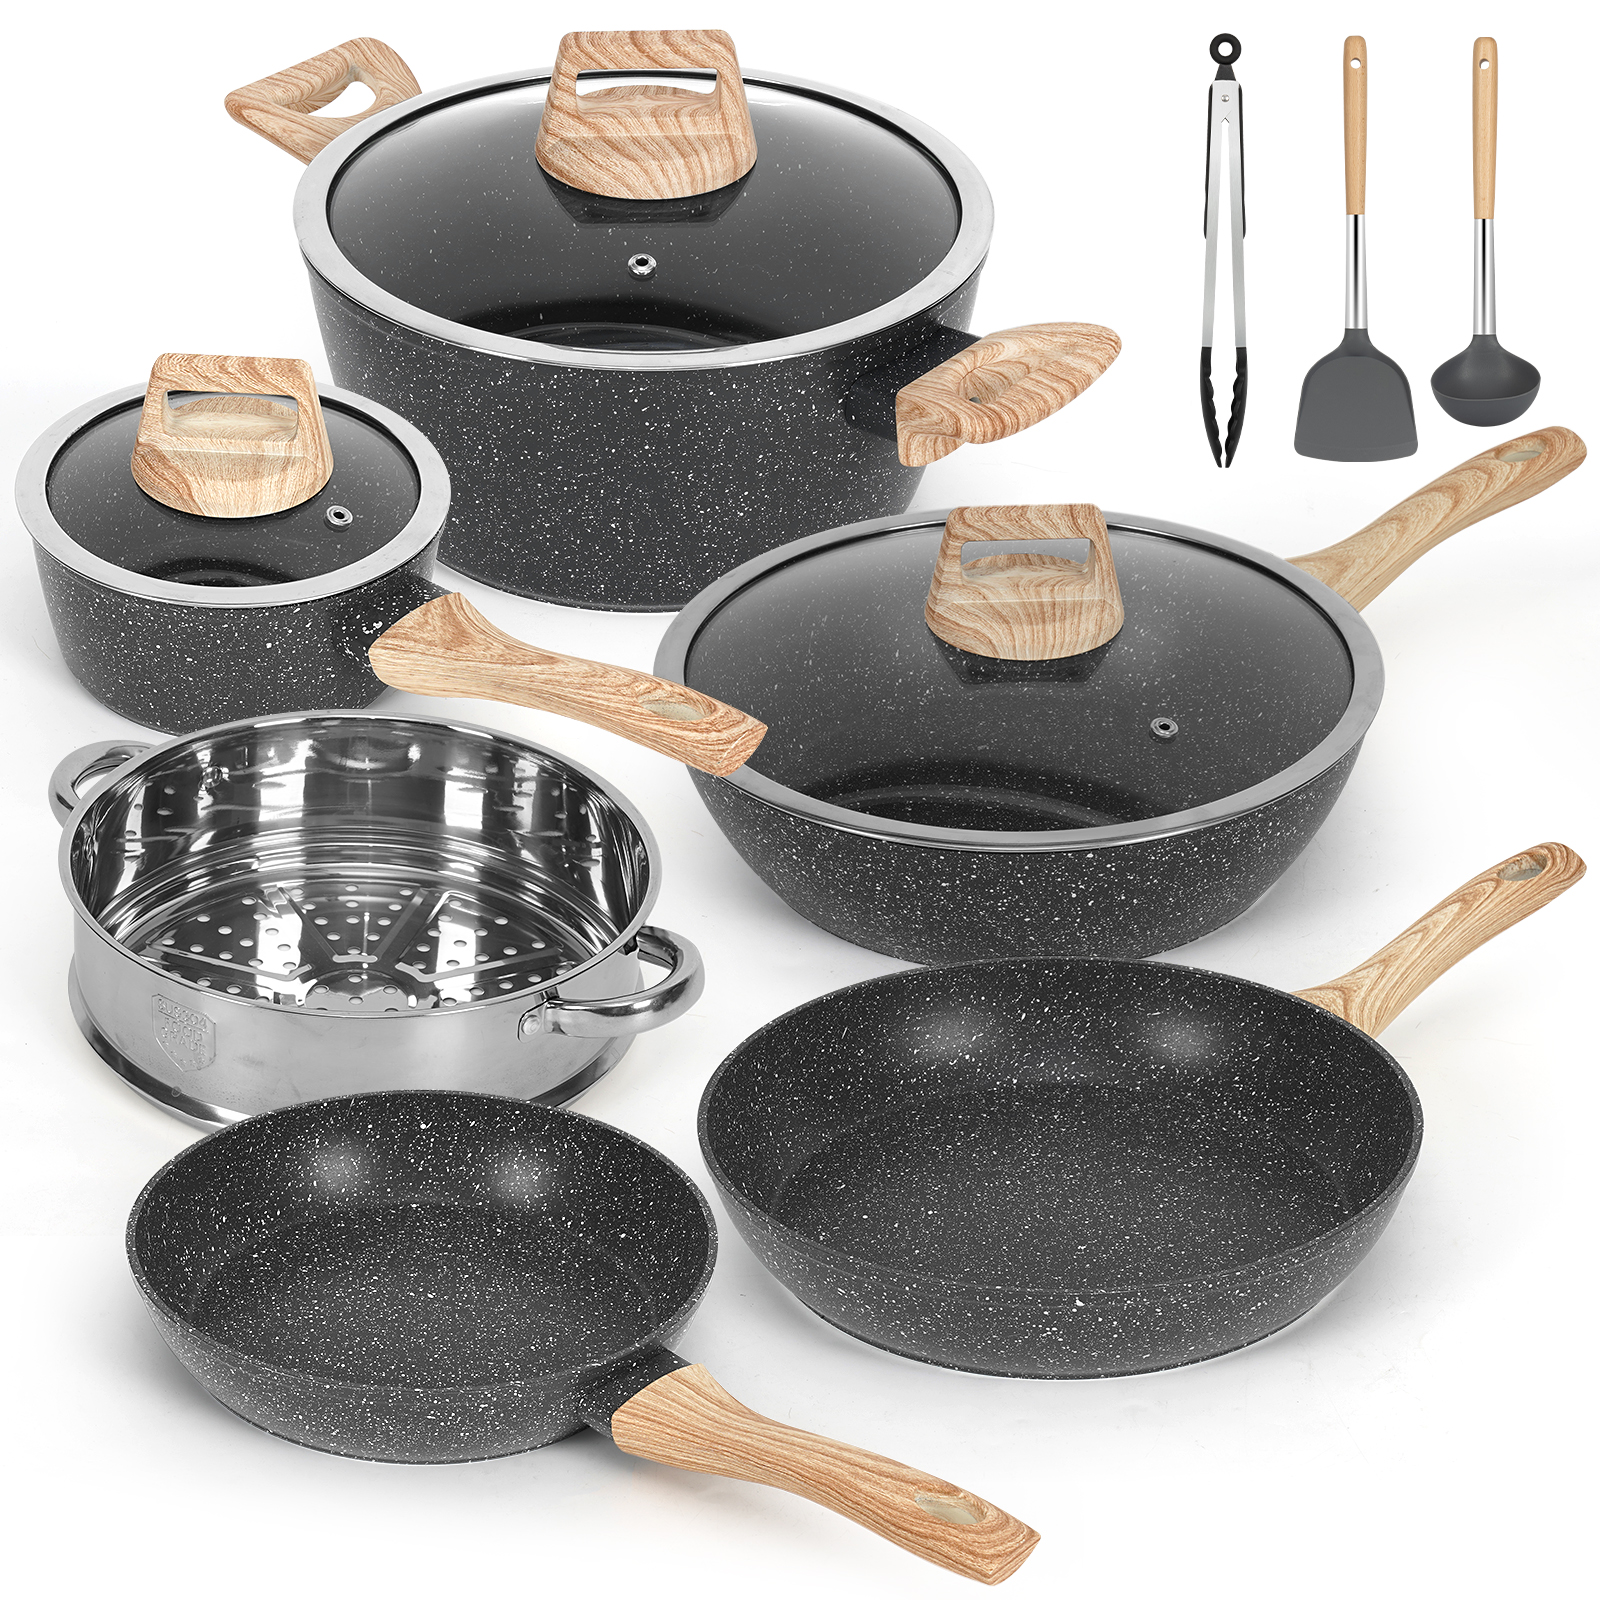 

12-piece Pot And Pan Set, Non-stick Pan, 12-piece Kitchen Cookware Set, Cooking Set, Including Frying Pan, Pan, Steamer, Silicone Spatula And Tongs (black)